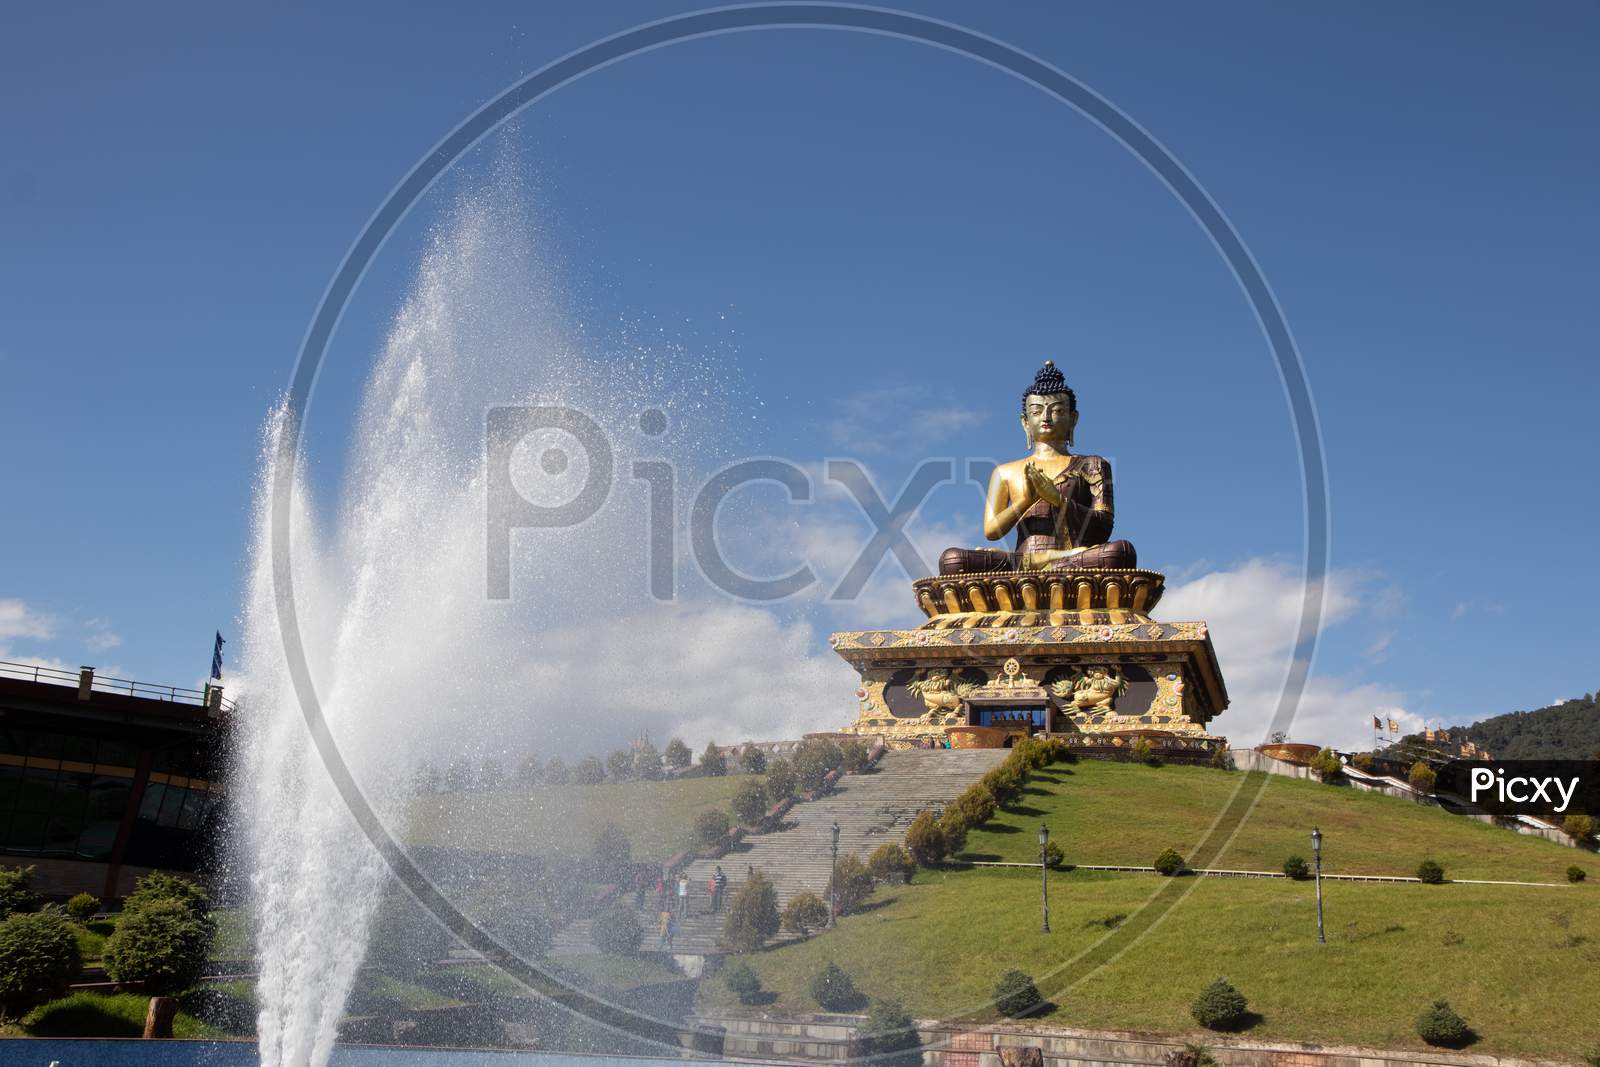 Buddha statue at the Buddha park with blue sky and clouds in the background